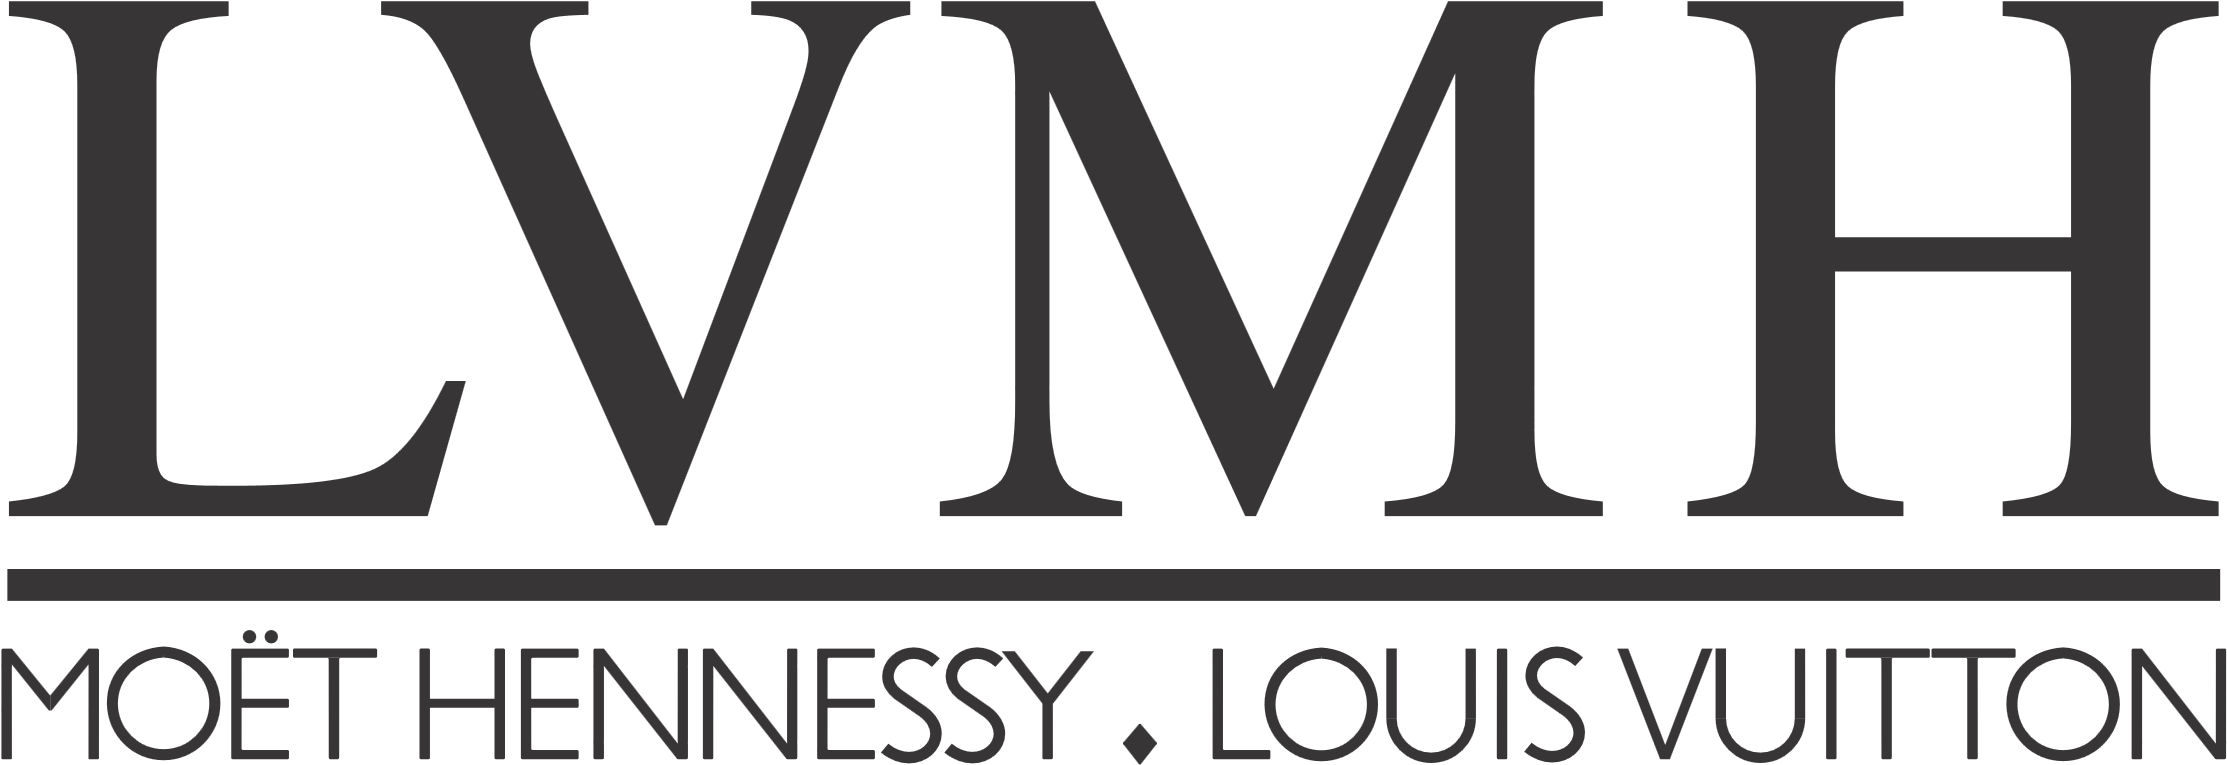 Download Lvmh Logo, Logotype - Louis Vuitton Moet Hennessy Logo PNG Image  with No Background 